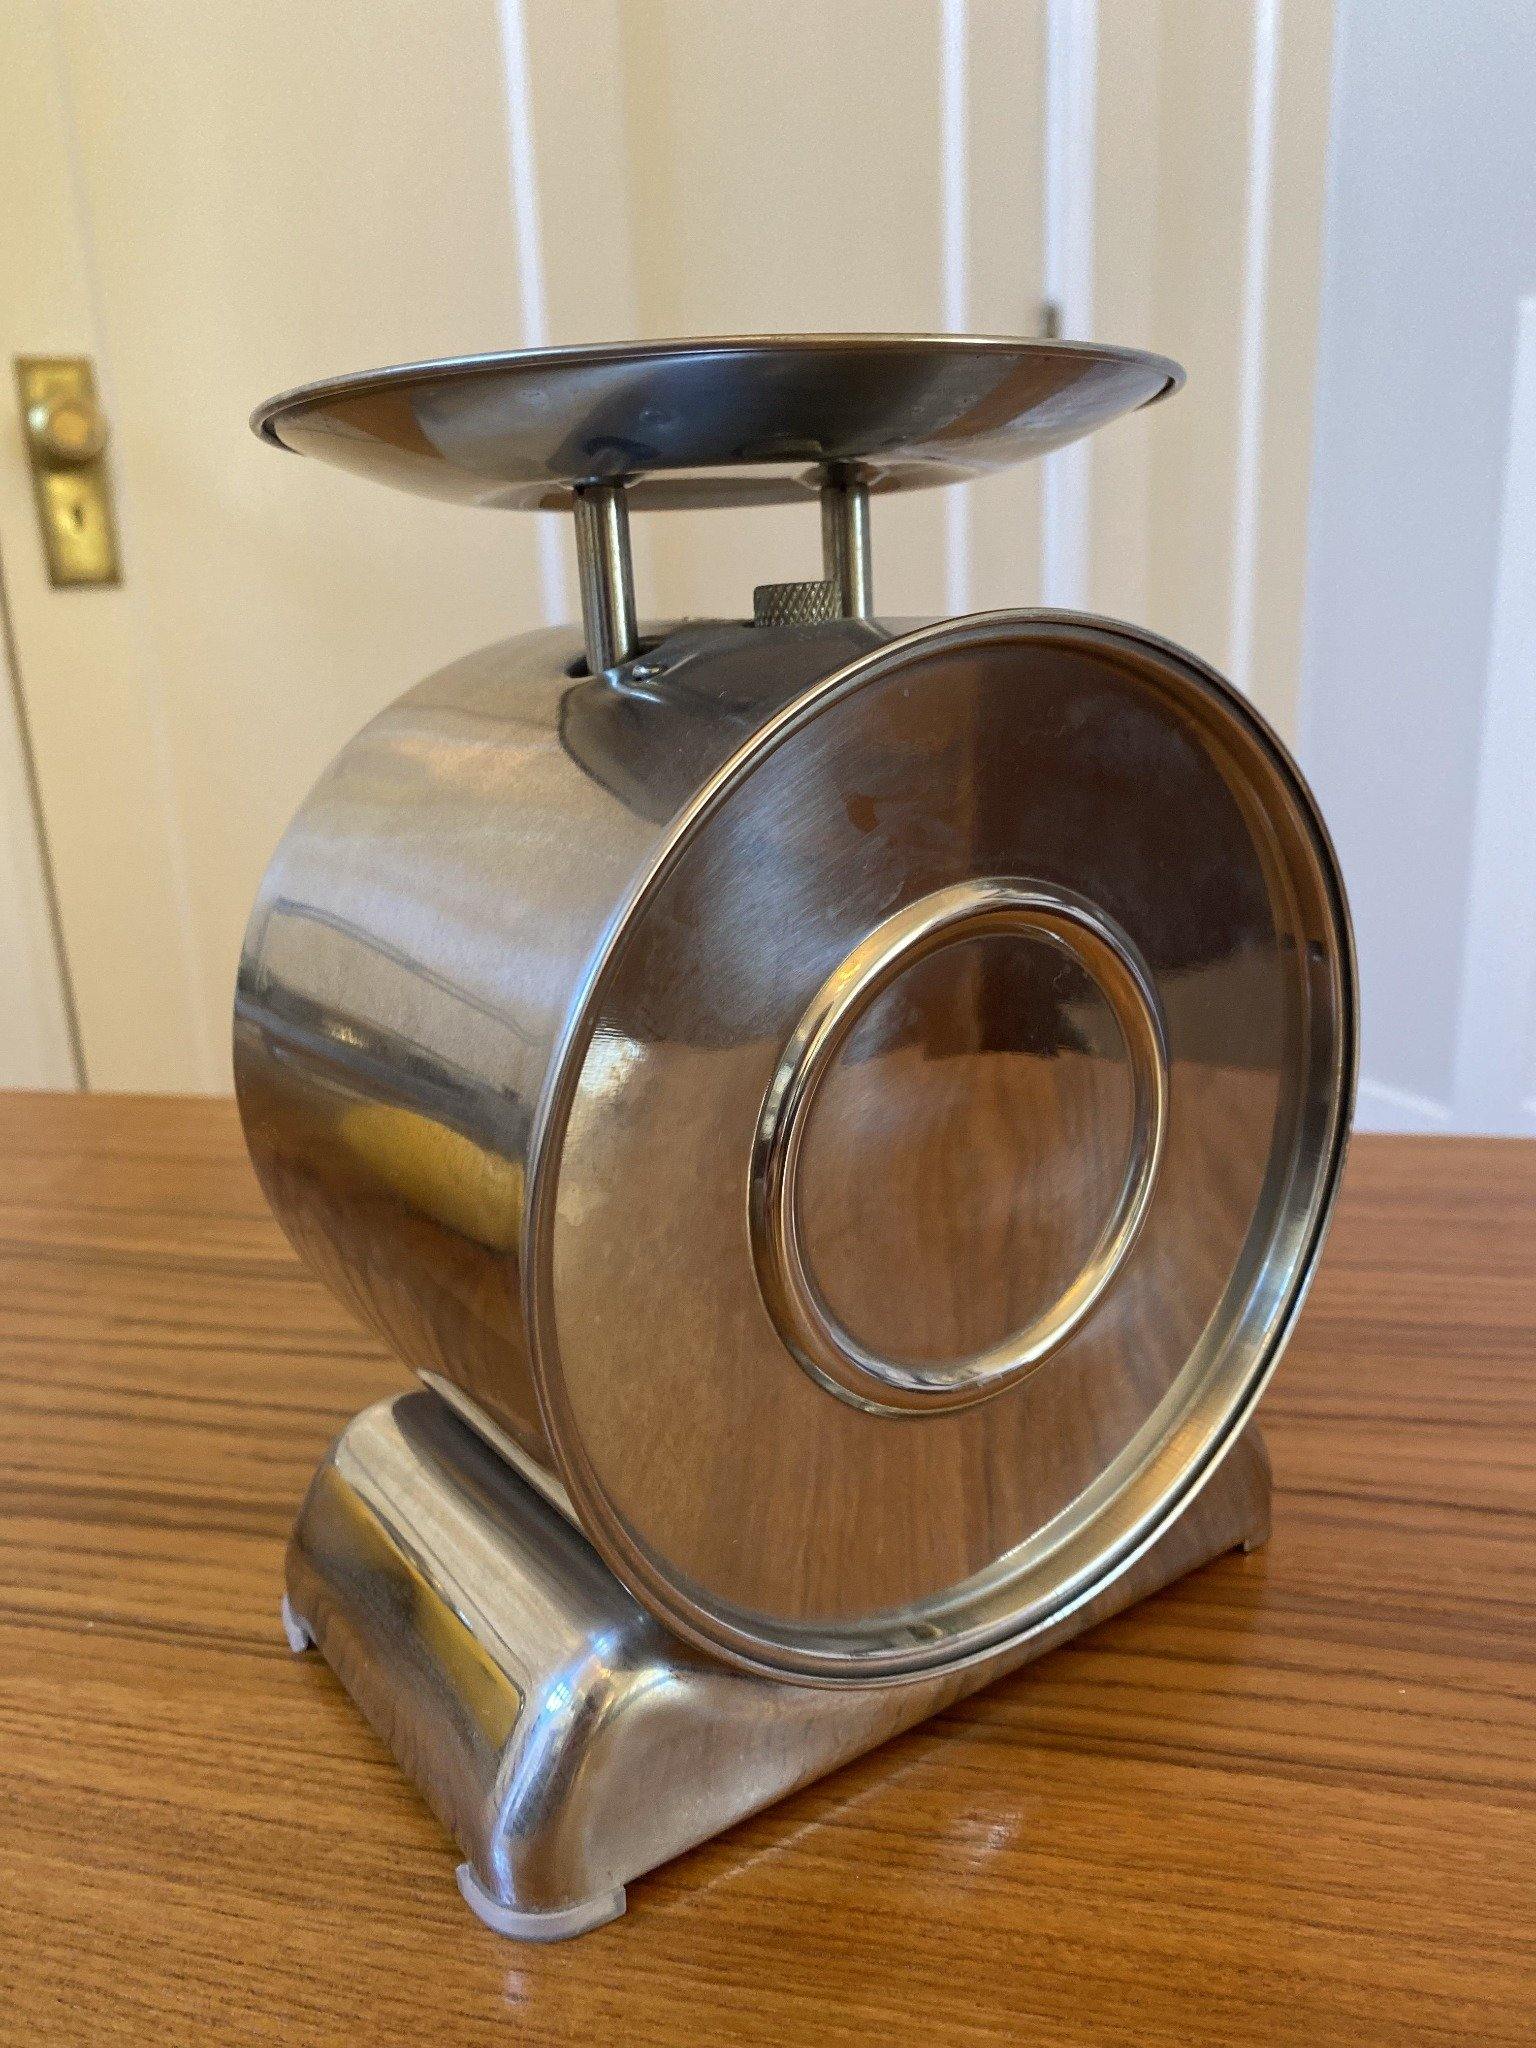 back view of chrome kitchen scale- Cook Street Vintage